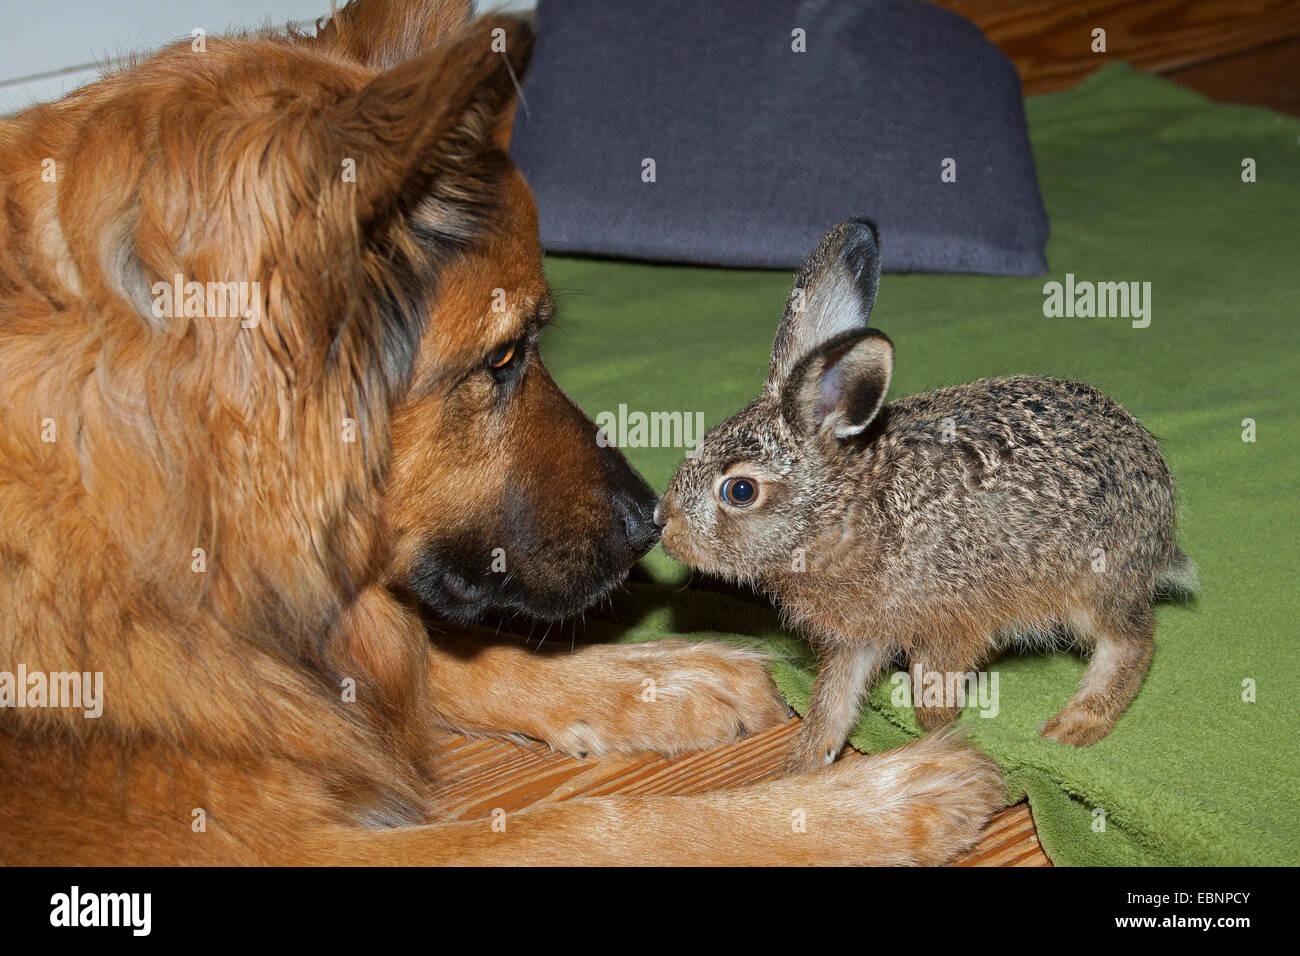 European hare, Brown hare (Lepus europaeus), dog and gentle bunny nosing at each other, Germany Stock Photo